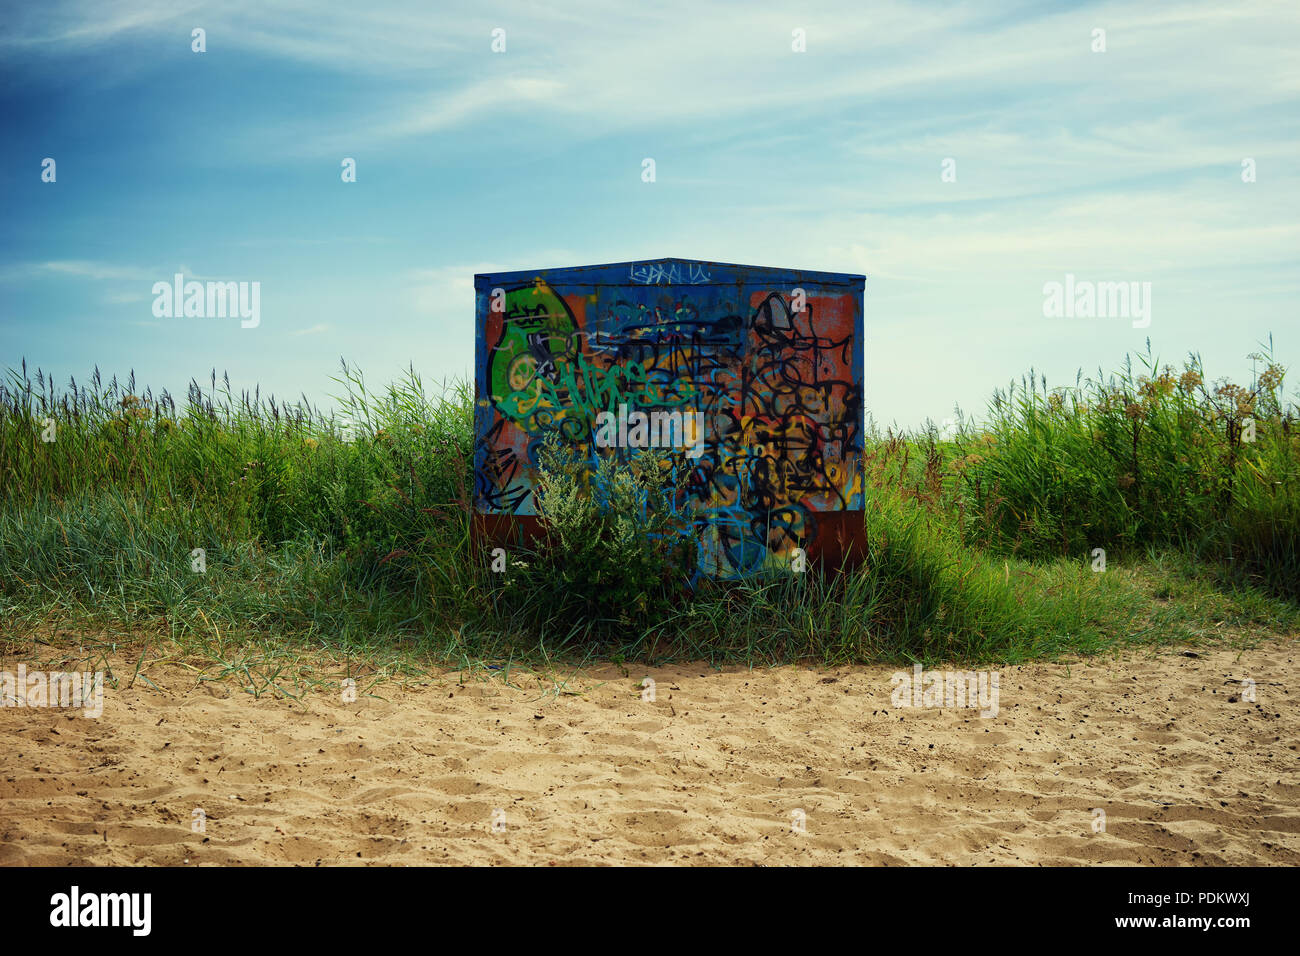 Graffiti on metal hangar on a background of blue sky on the beach in the green grass Stock Photo